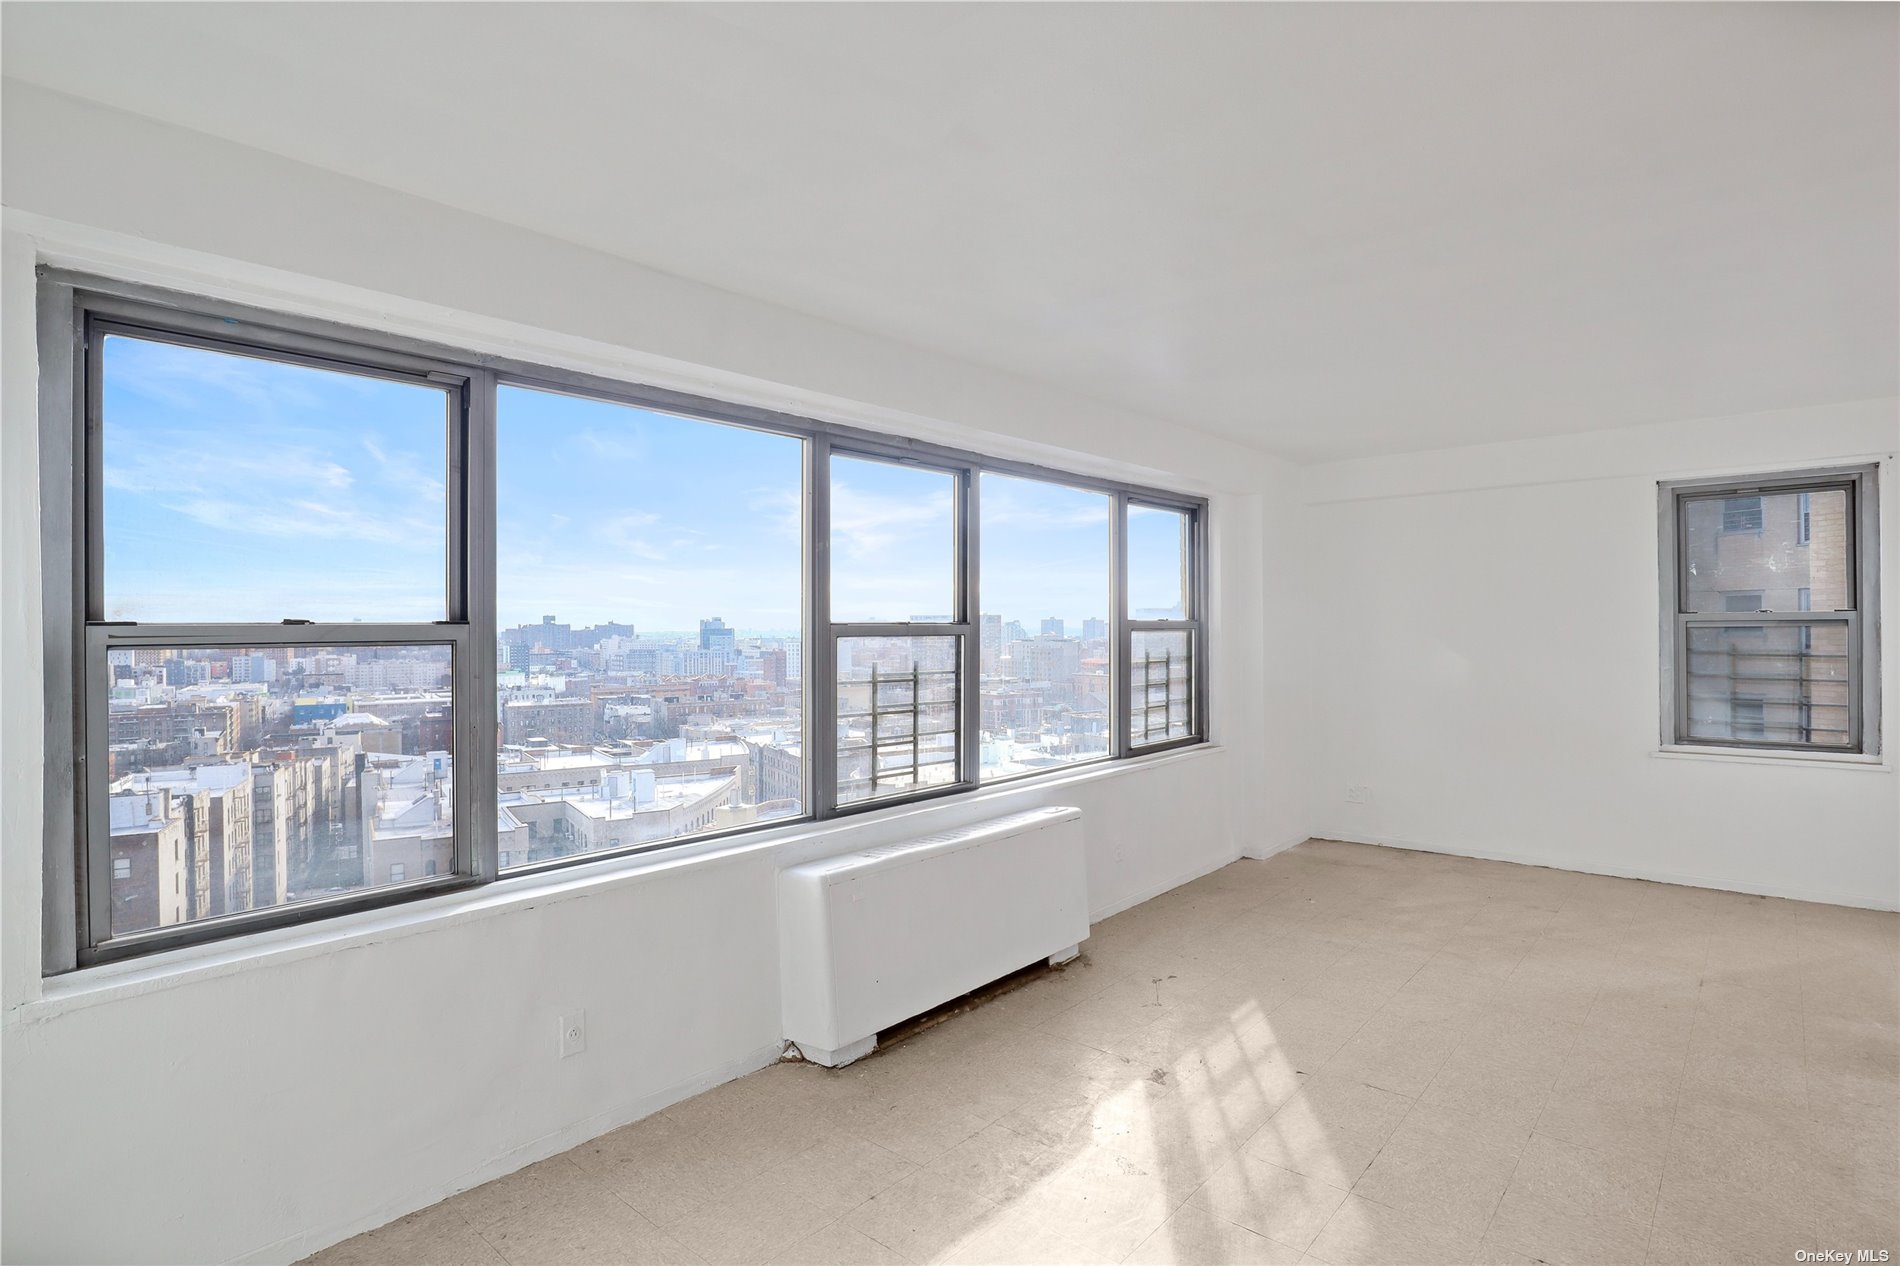 Property for Sale at 1020 Grand Concourse 14B, Bronx, New York - Bathrooms: 1 
Rooms: 2  - $179,999